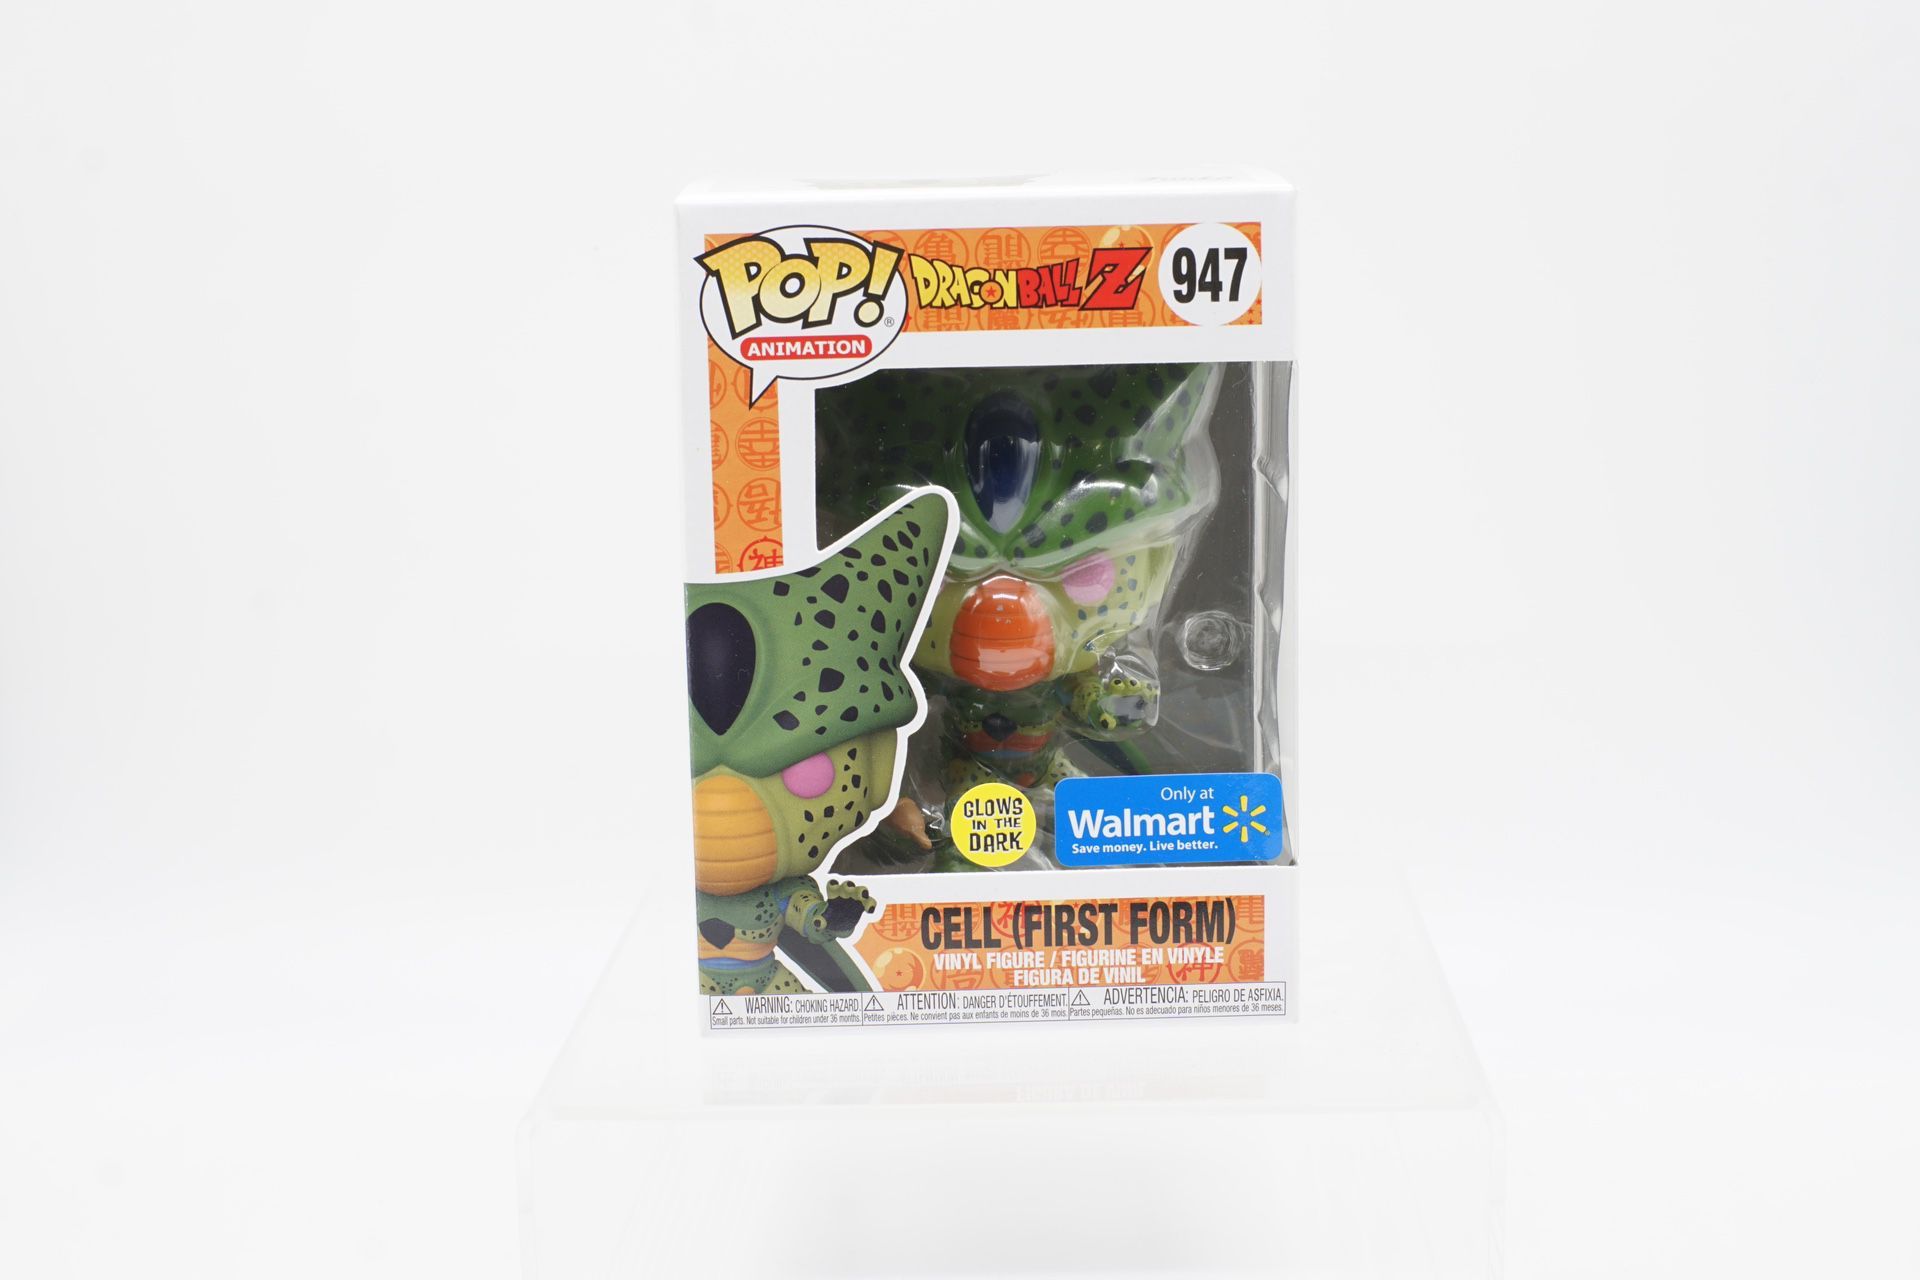 Cell (First Form) (Glow In The Dark) Funko 947